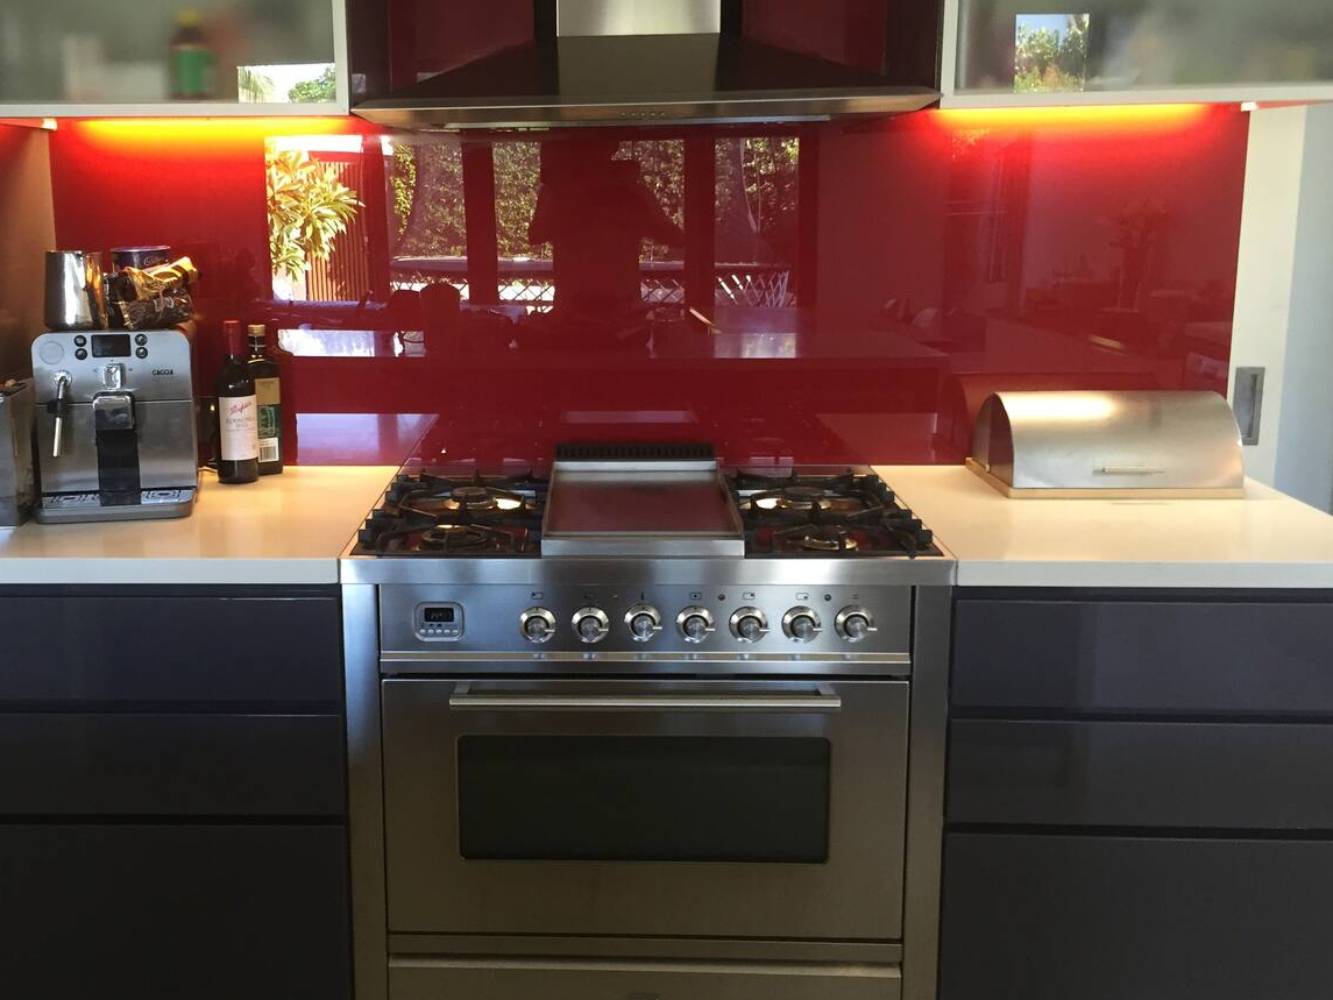 Large oven with 6 burner stove